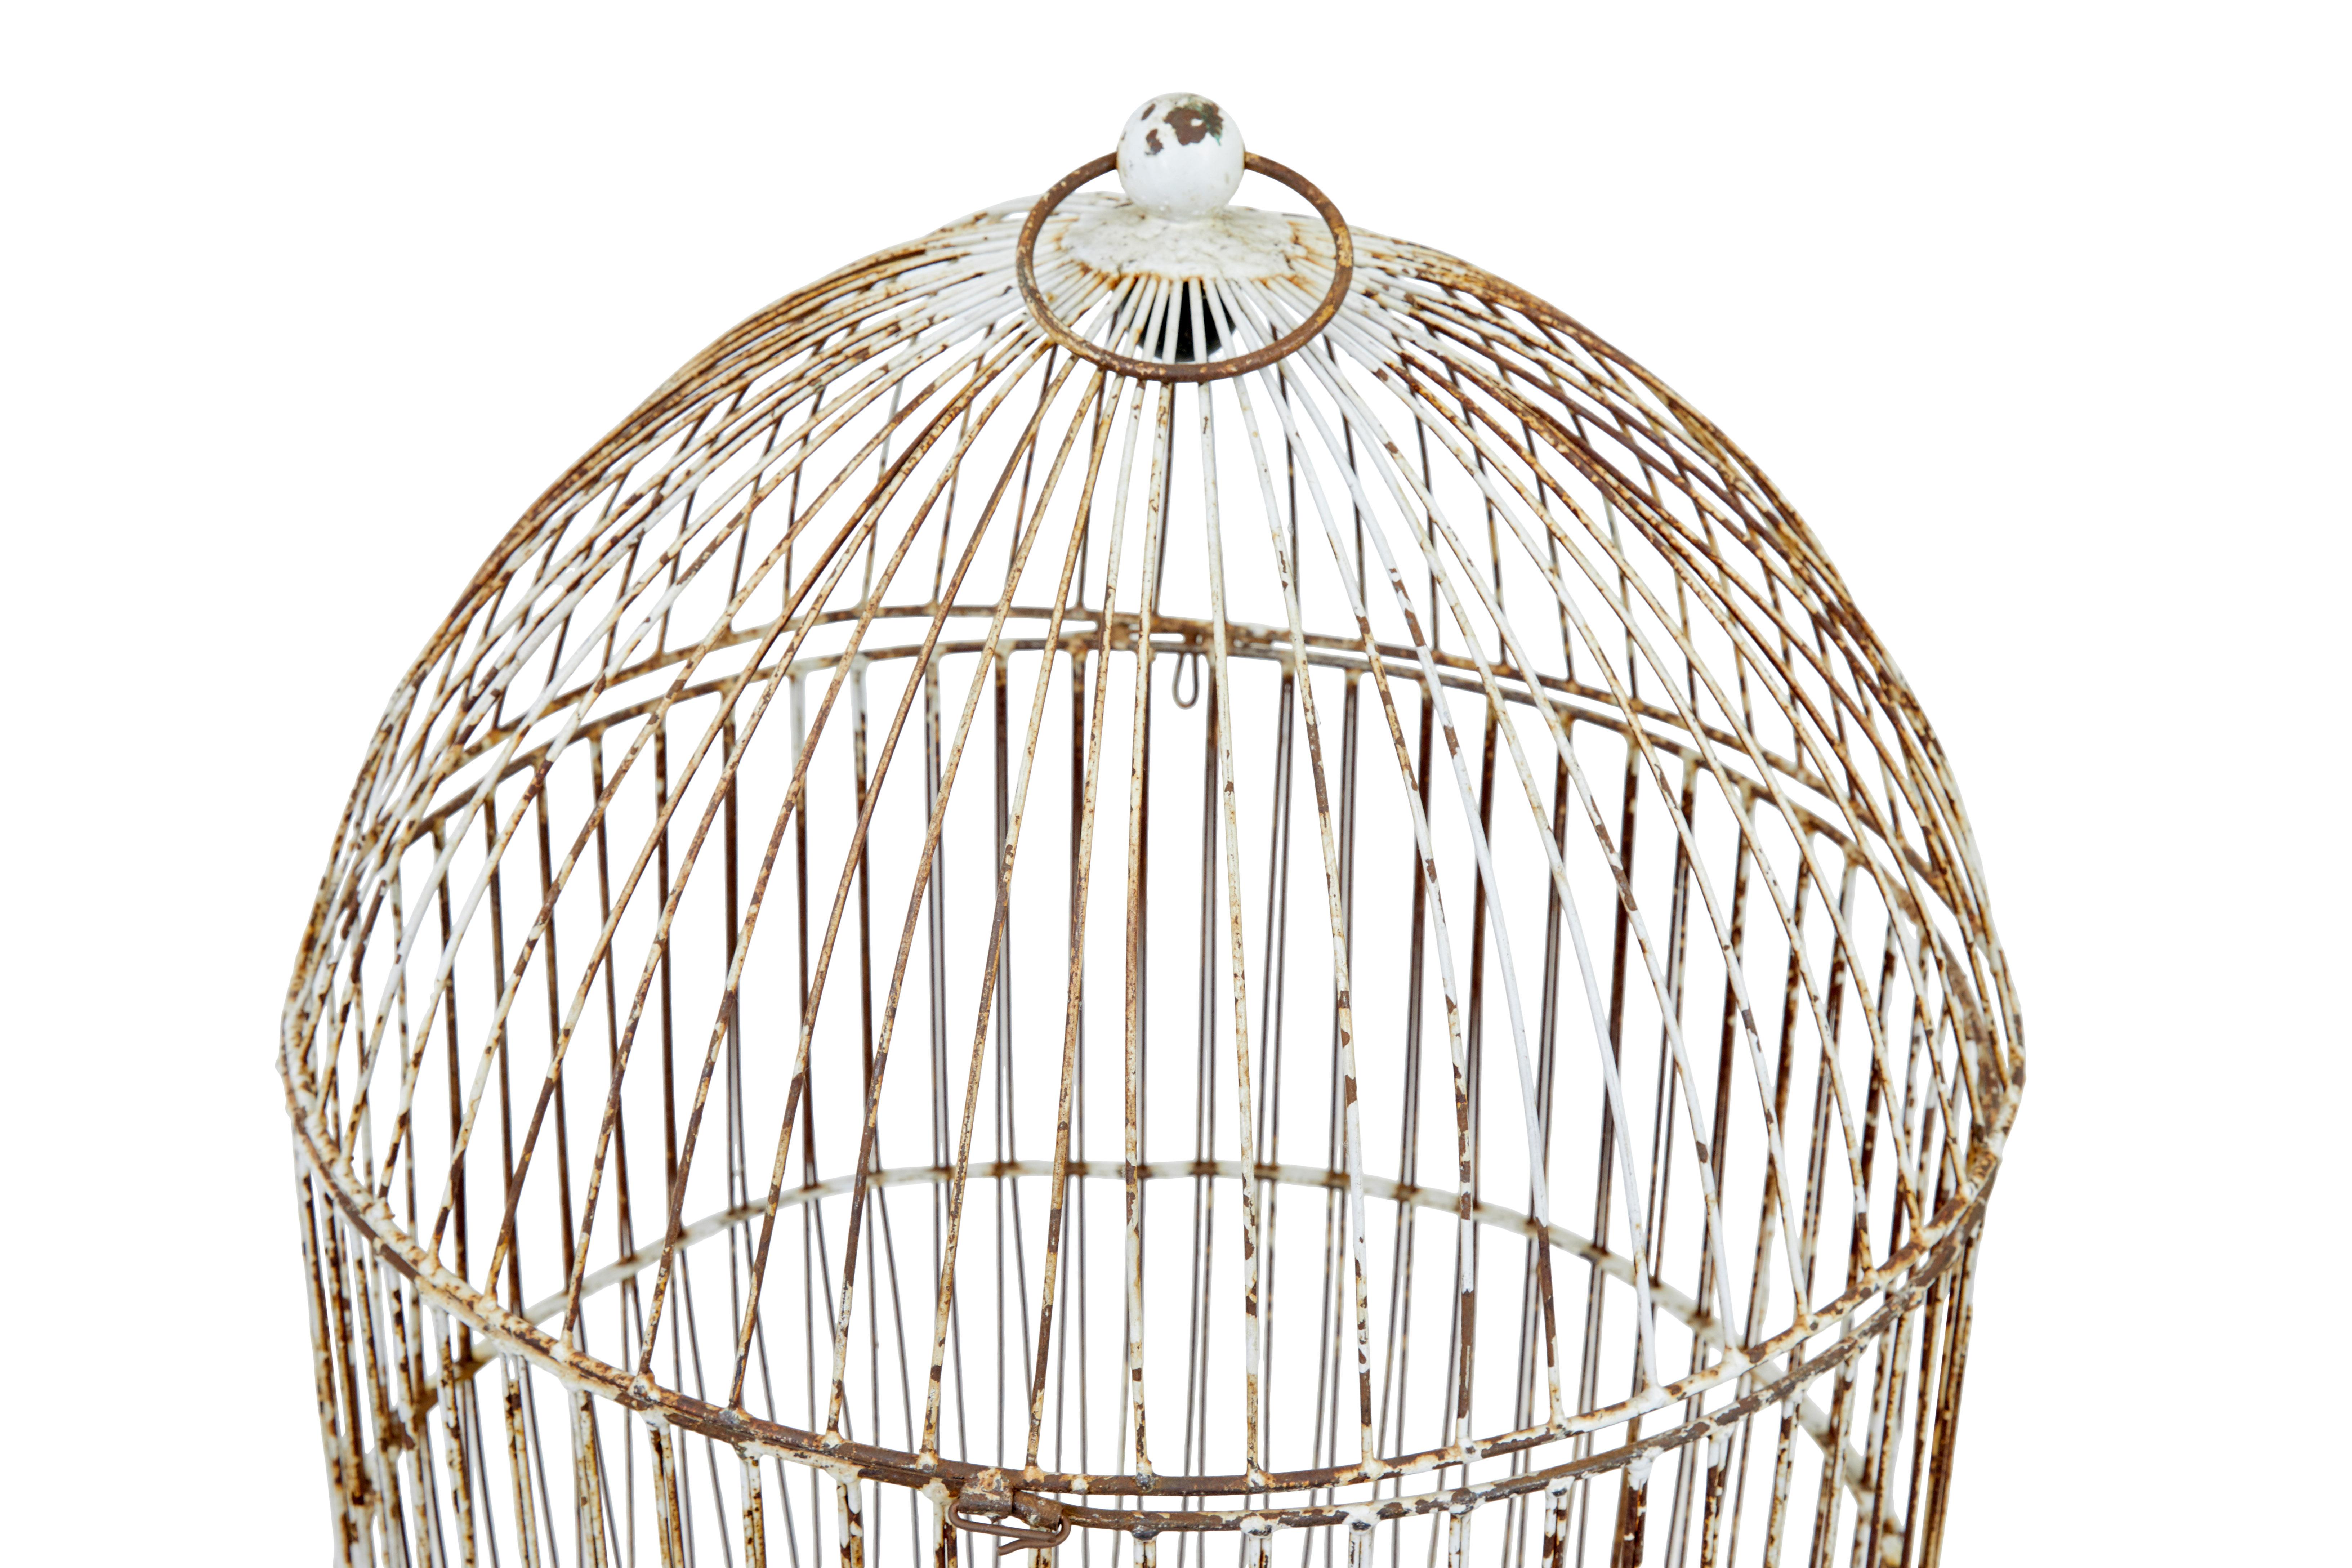 English 19th Century large wire frame decorative bird cage For Sale